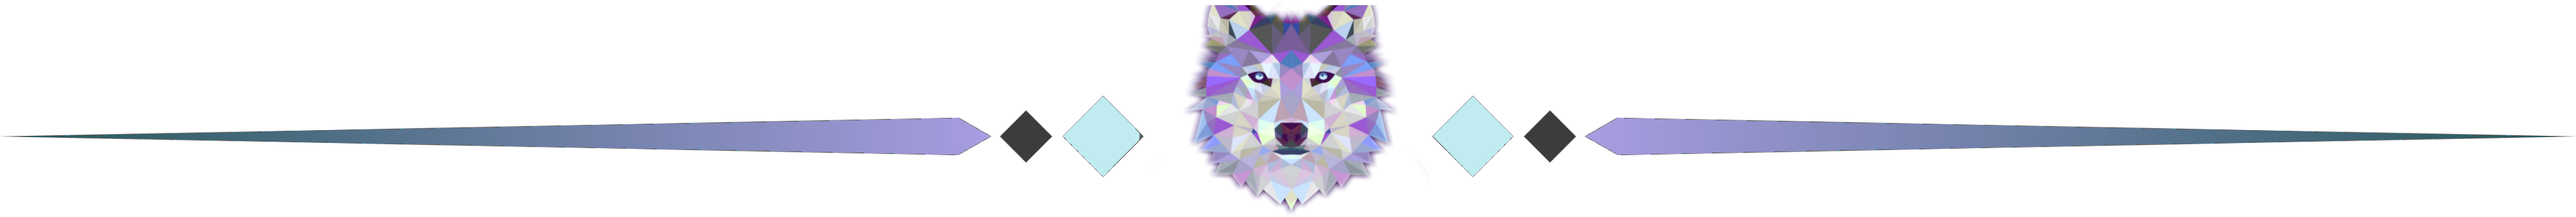 wolf divider1.png